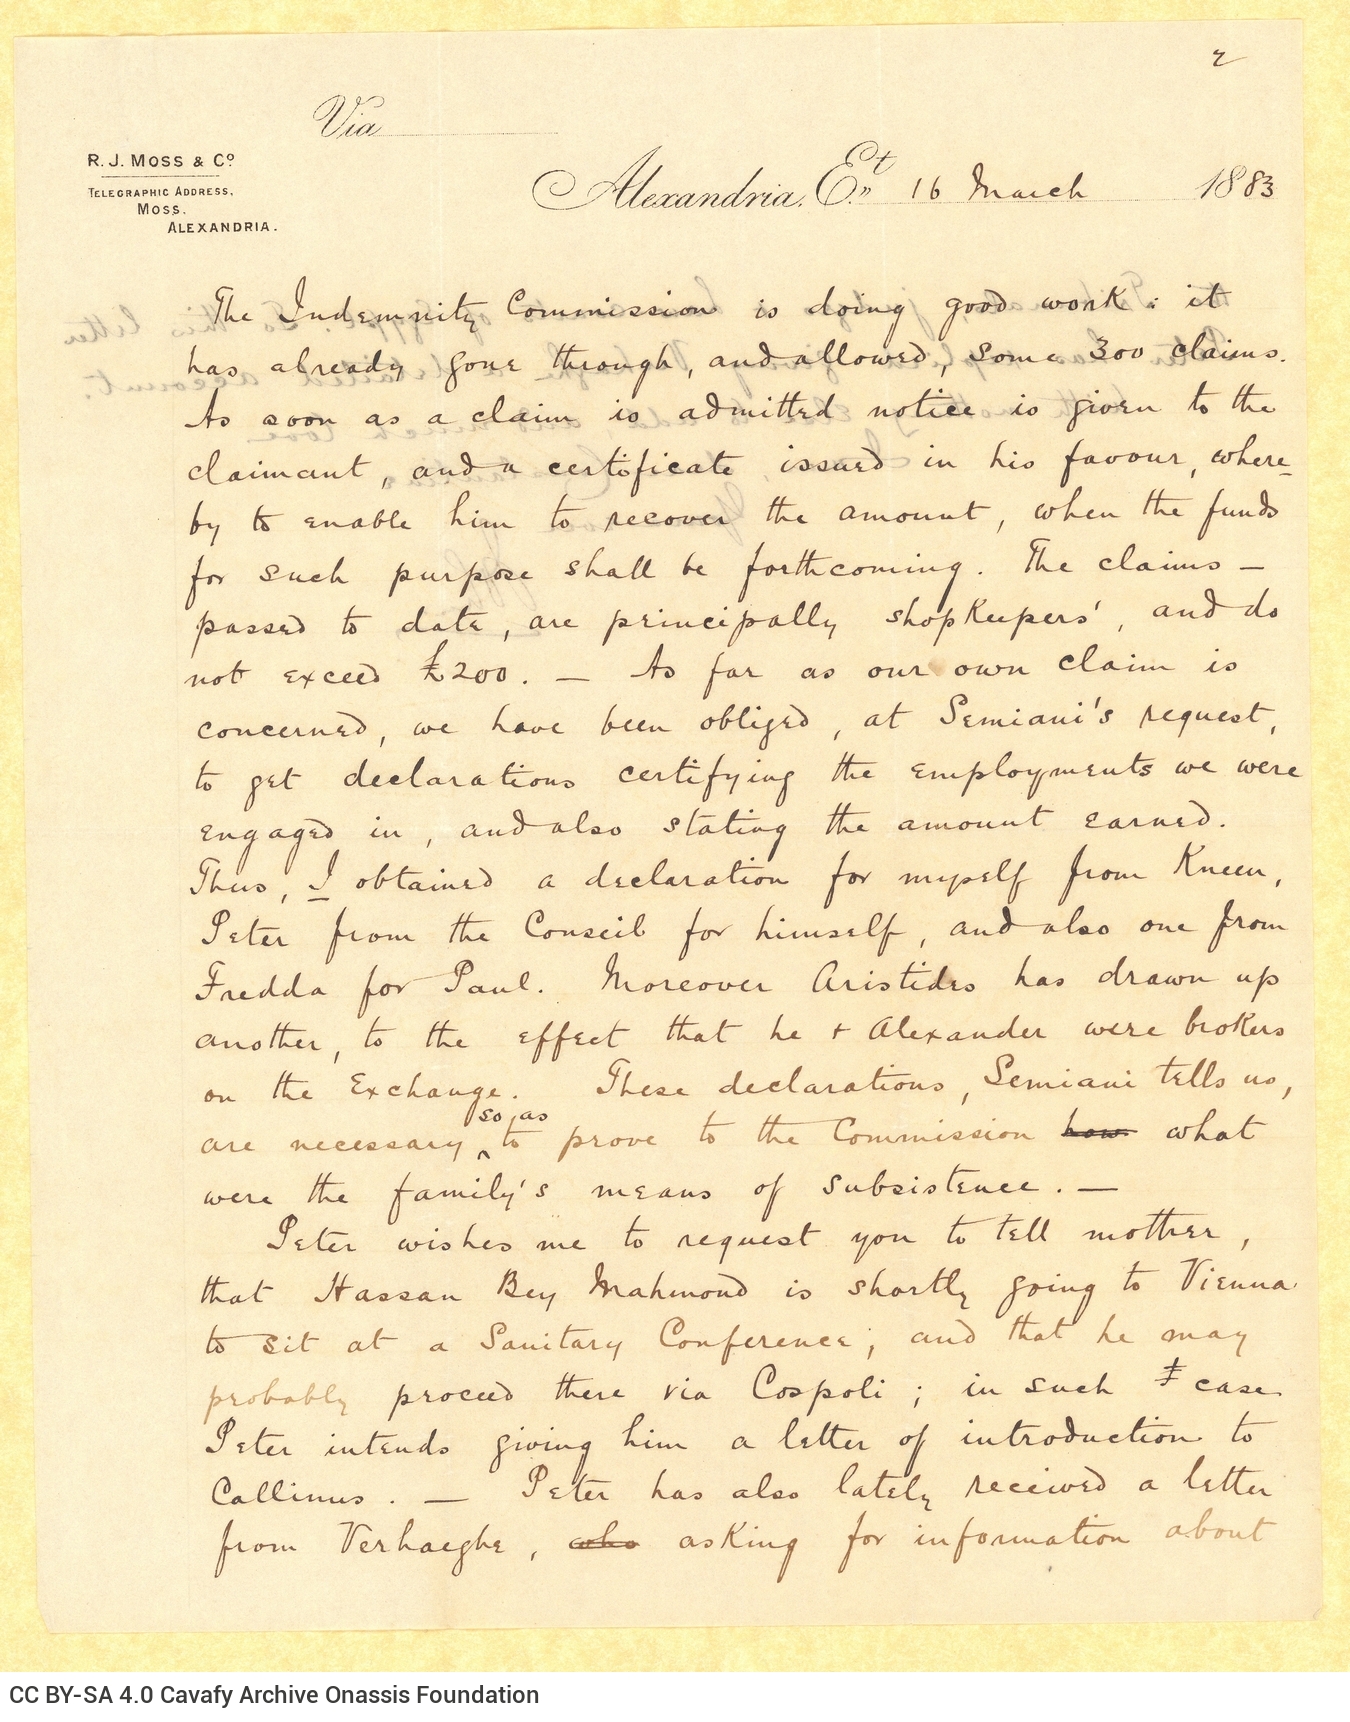 Handwritten letter by John Cavafy to C. P. Cavafy on two letterheads of R. J. Moss & Co., Alexandria. The second page is numb